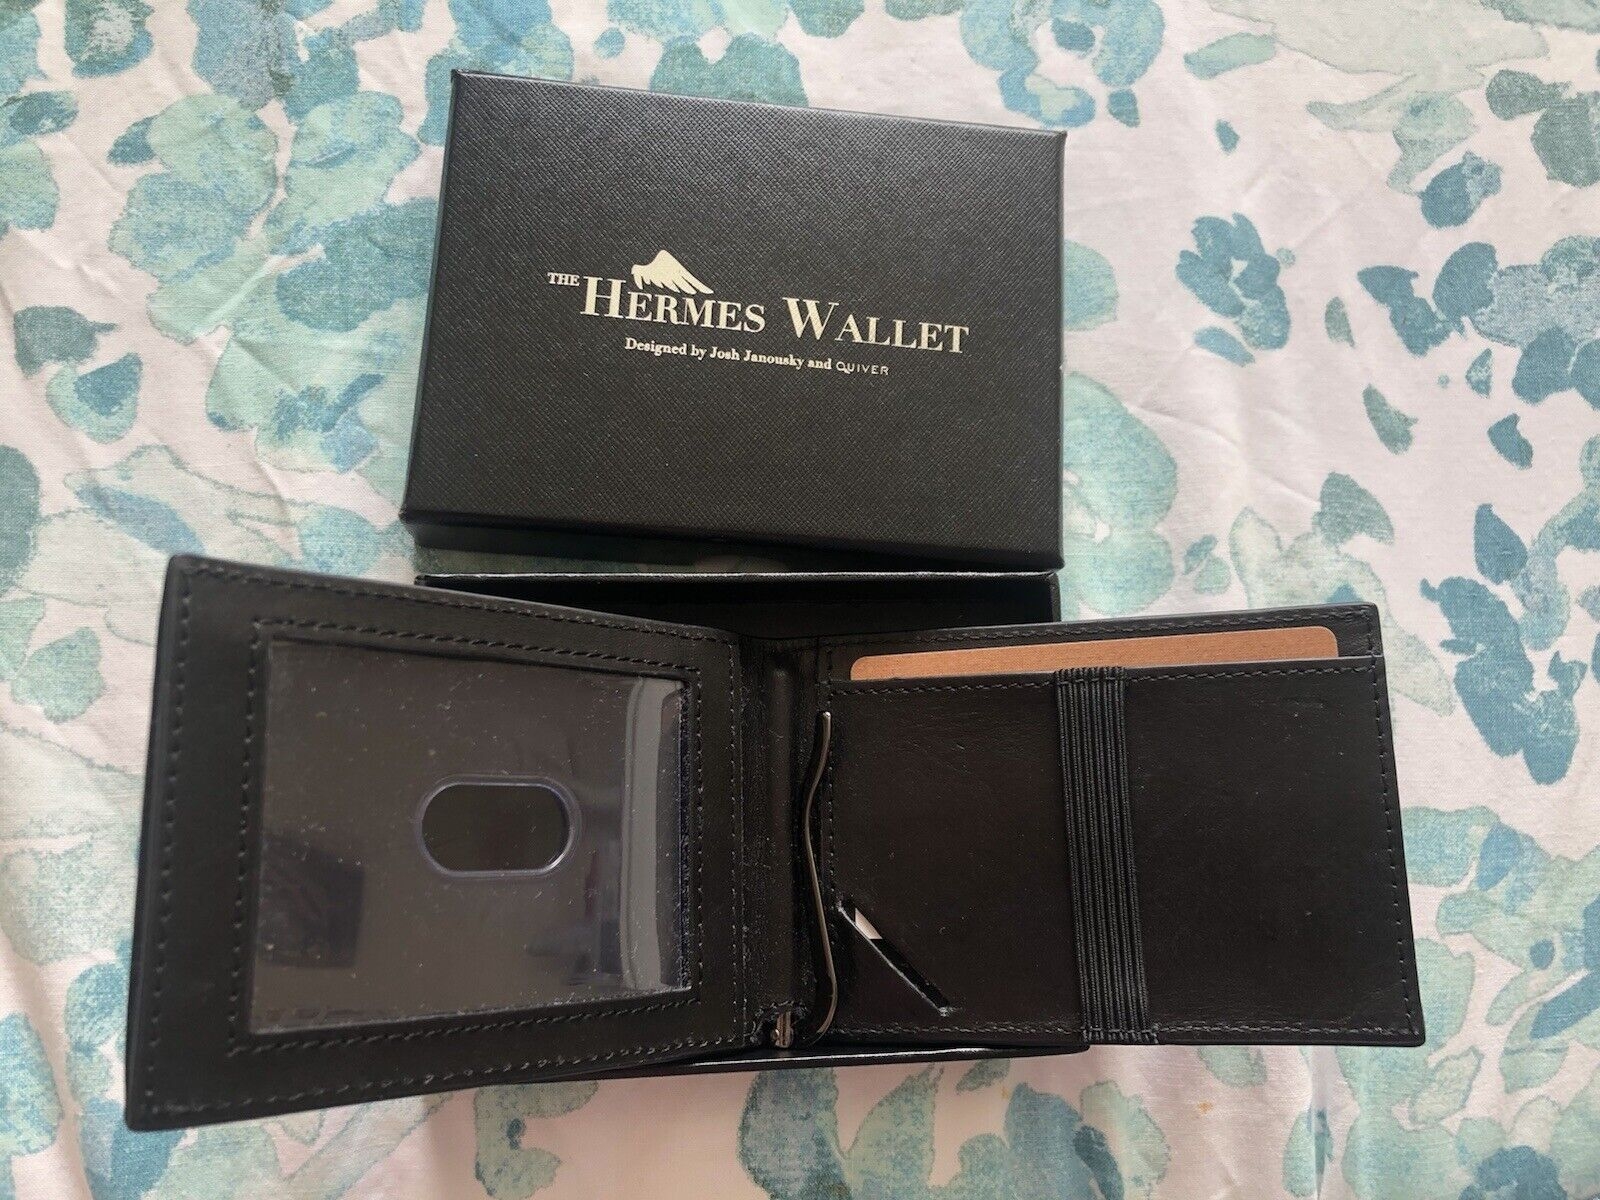 Hermes wallet layed flat next to box